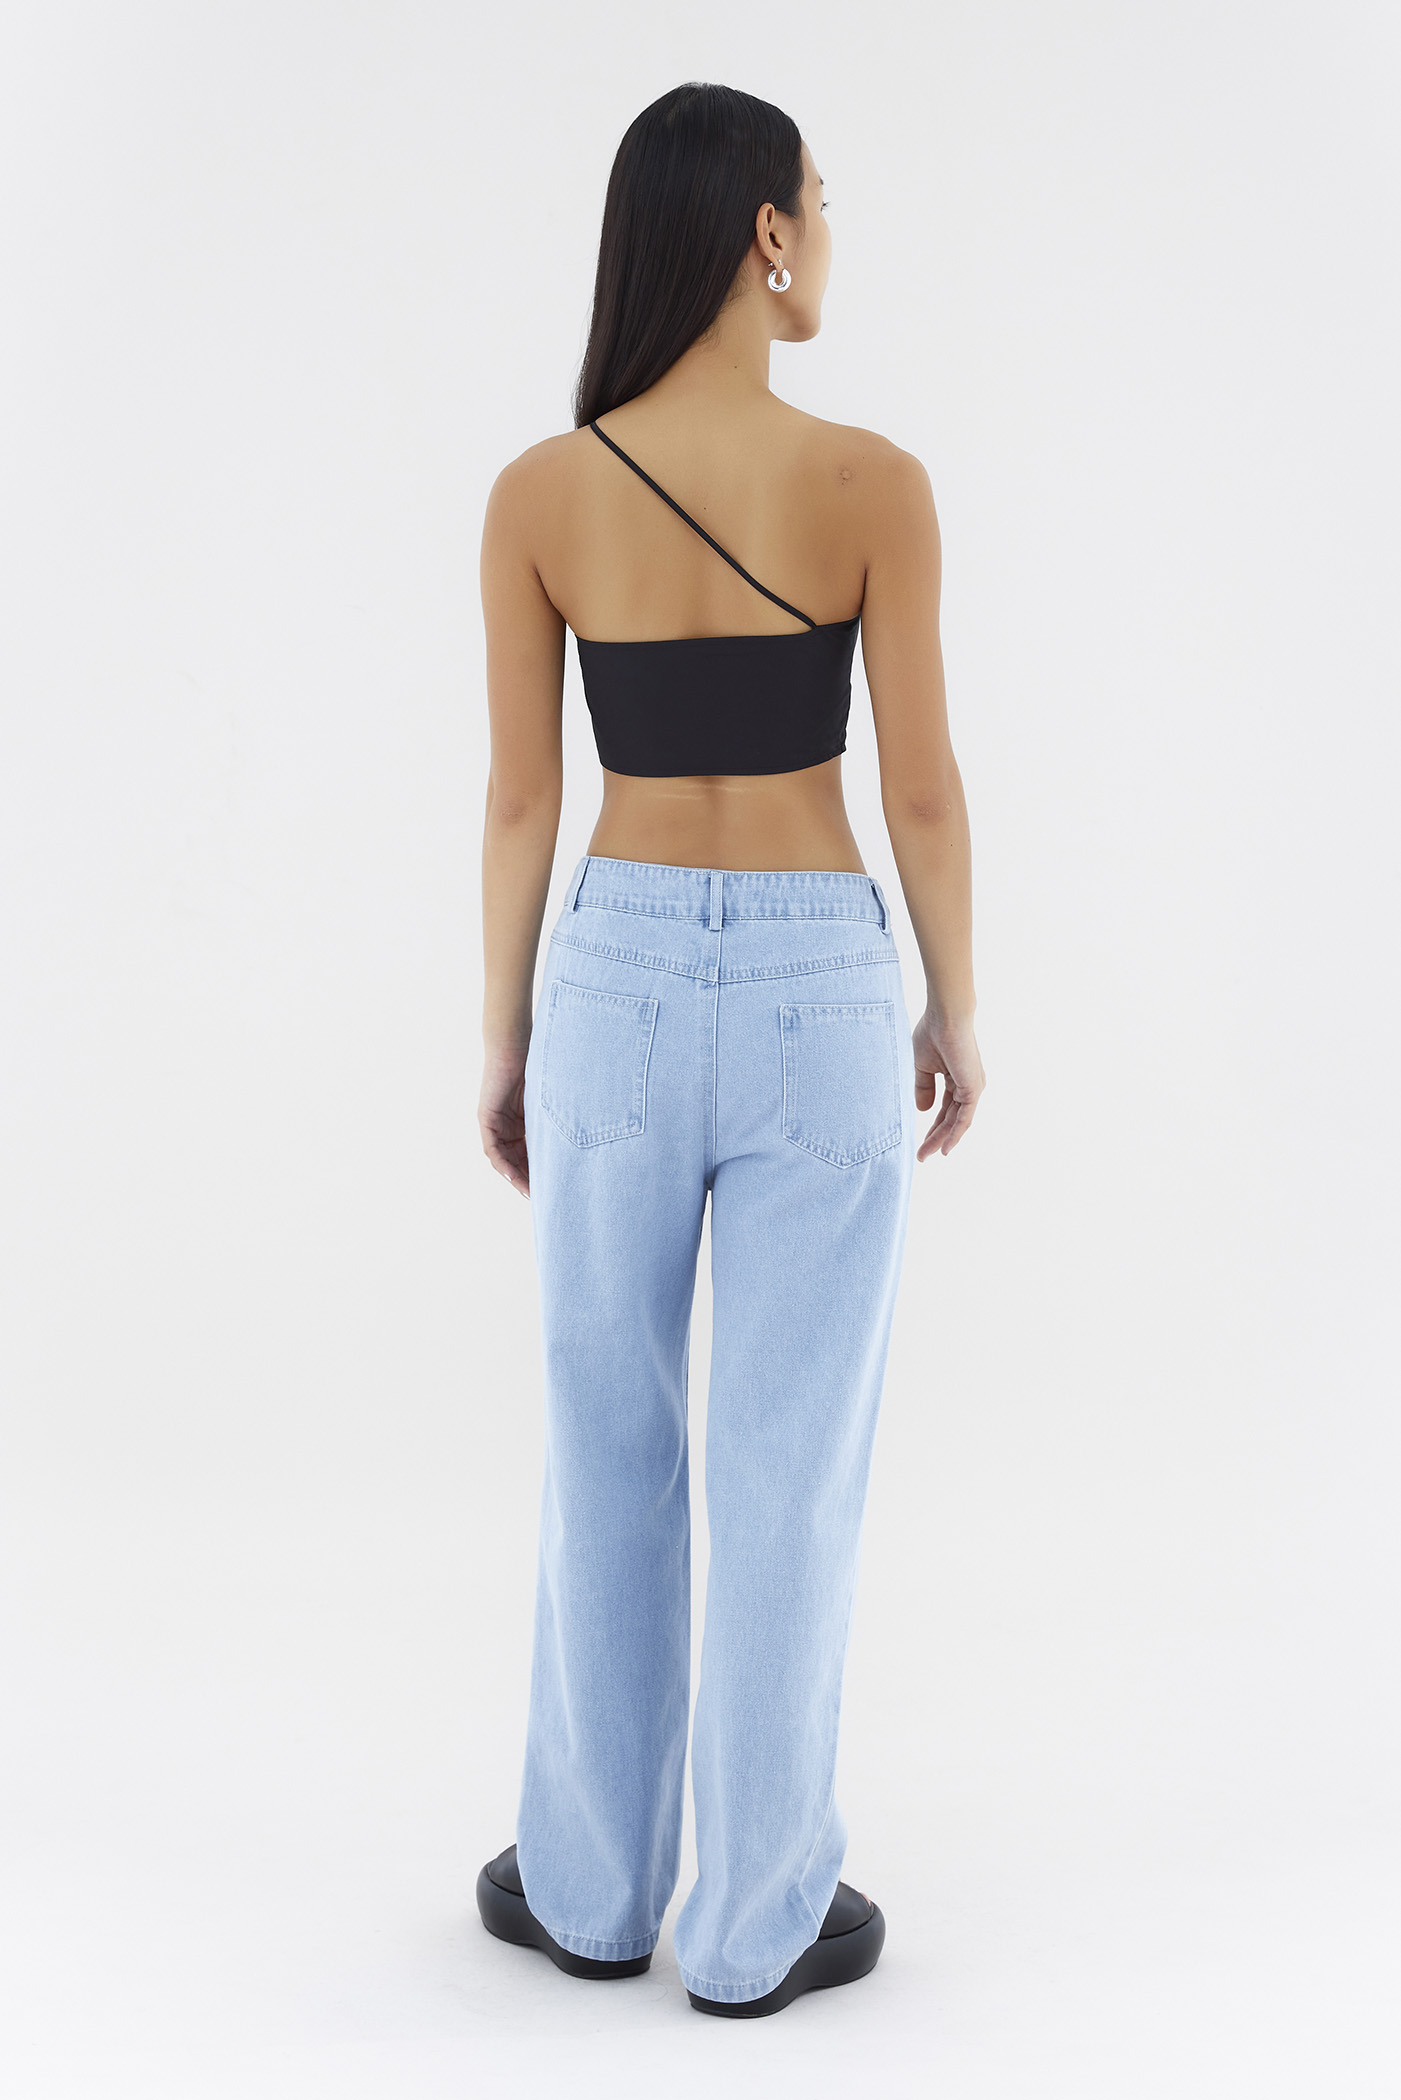 Hinsley One-Shoulder Ruch Top